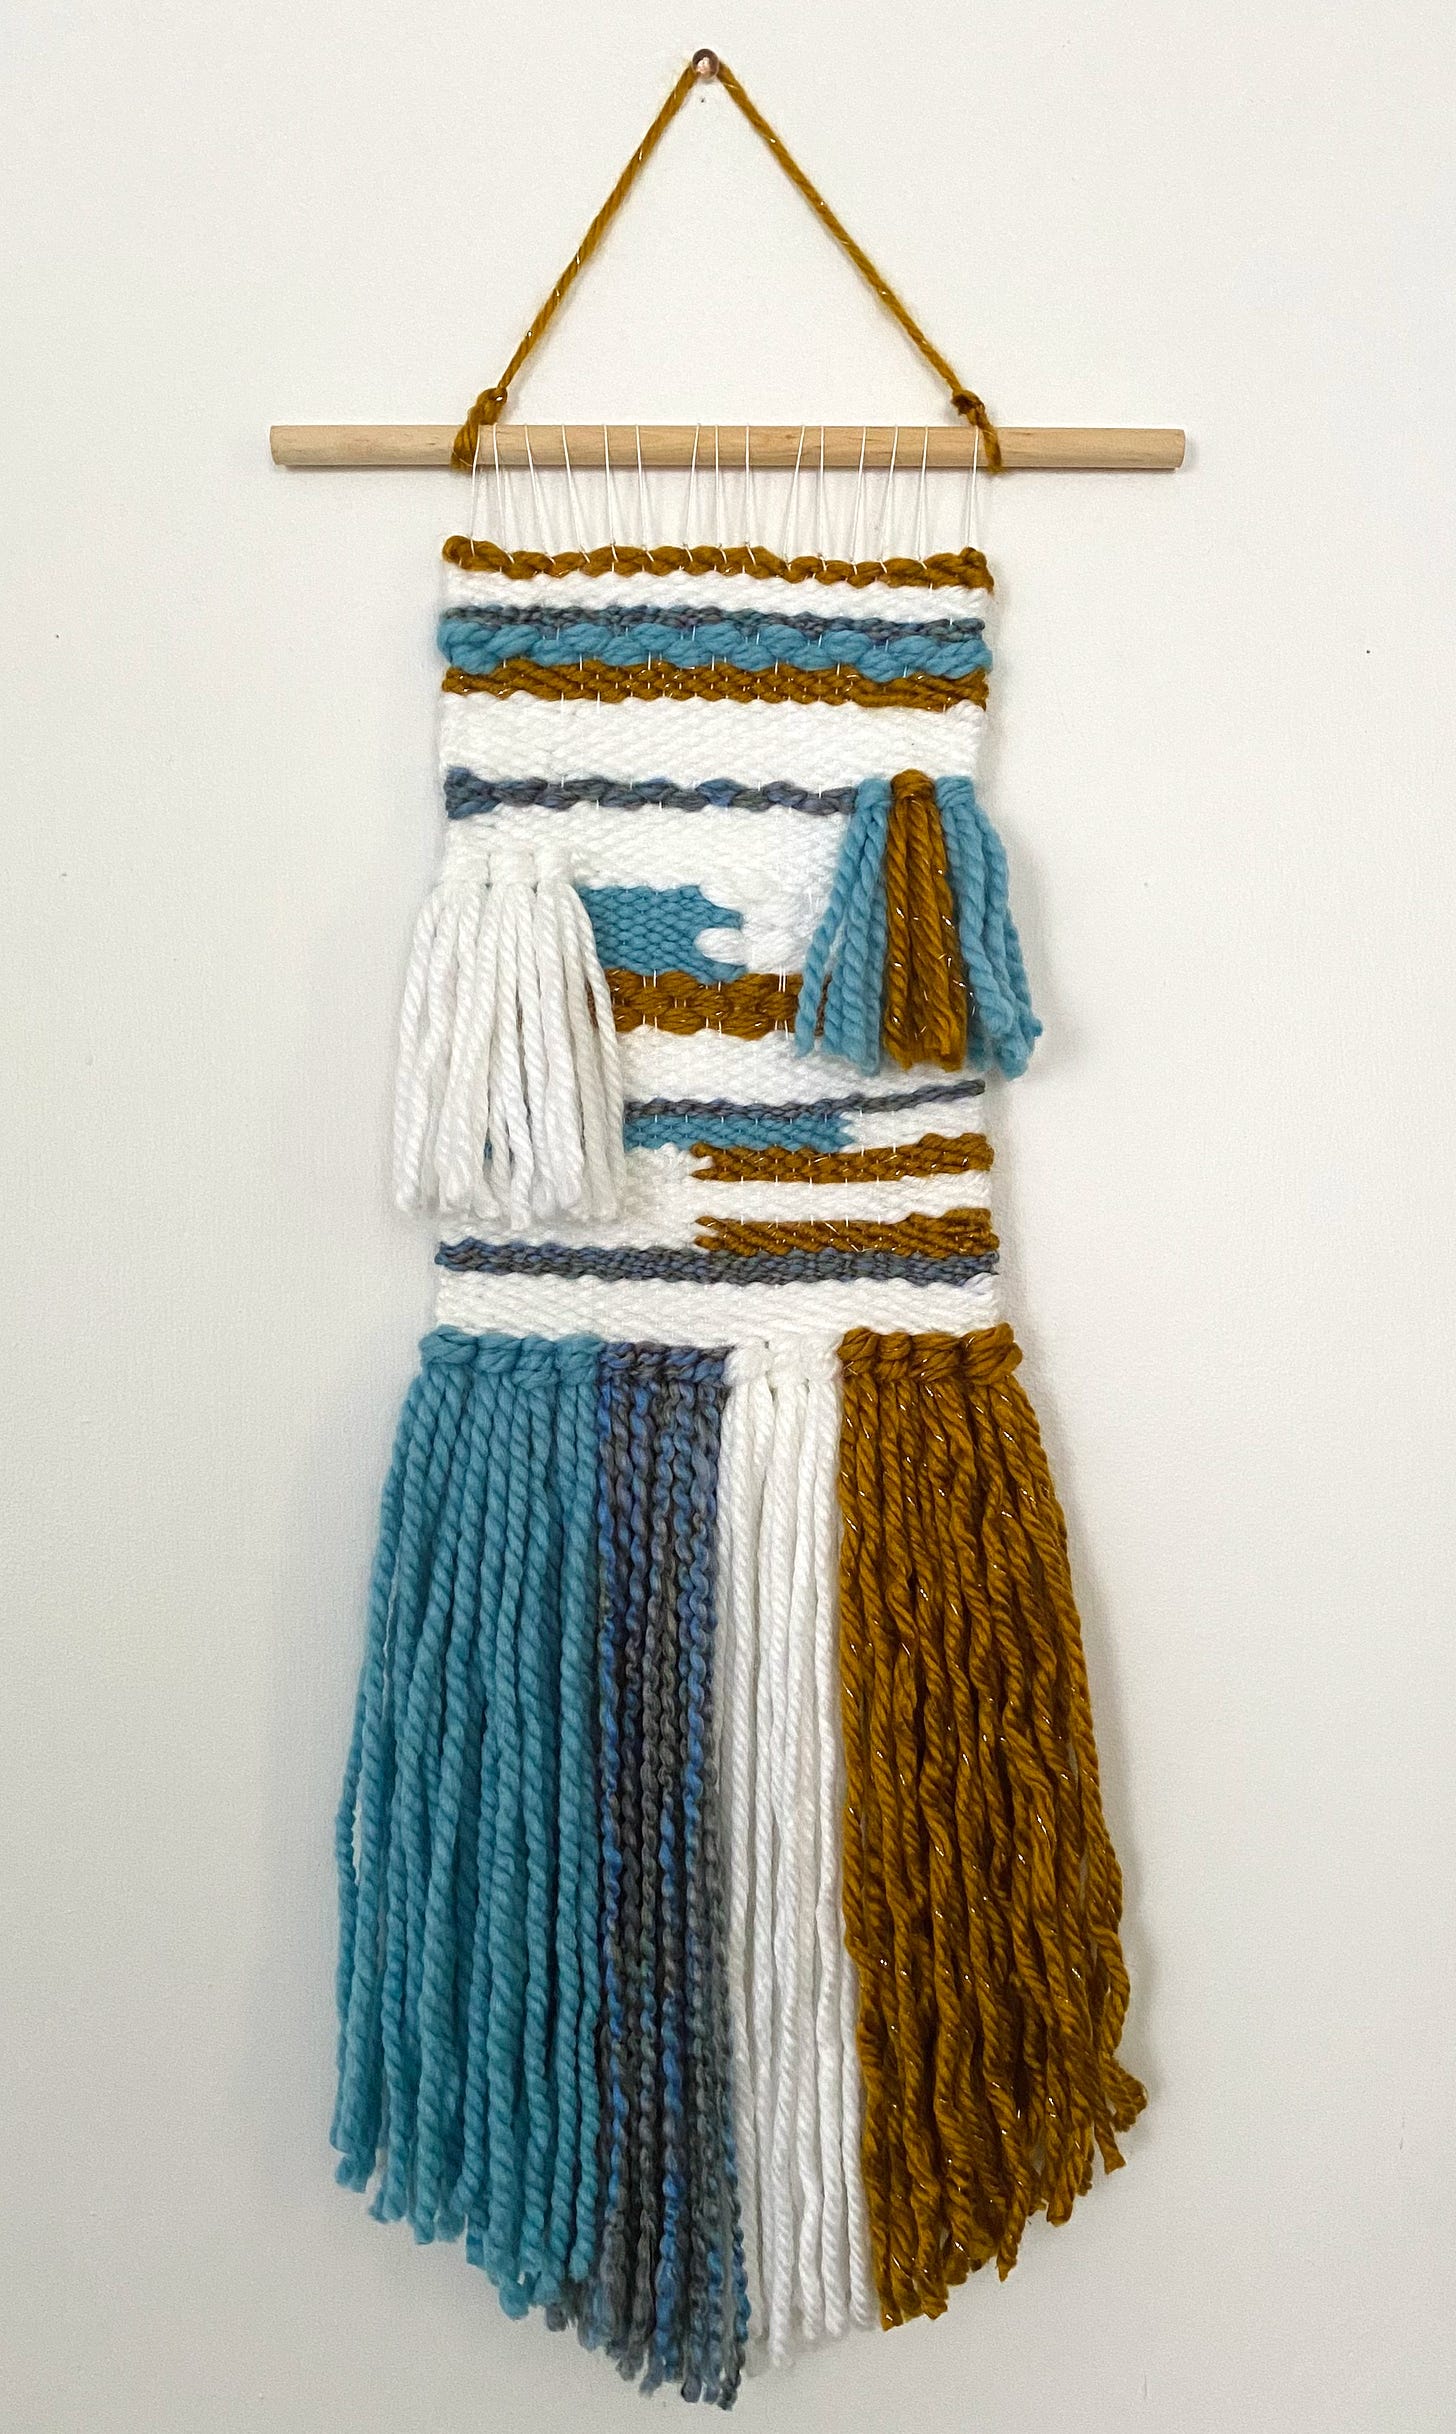 Small wall tapestry weaving with sky blue, deep wavy blue, white, and wavy sparkly rust colored yarn. Hanging on a wooden dowel. The pattern contains fringe and color blocks.